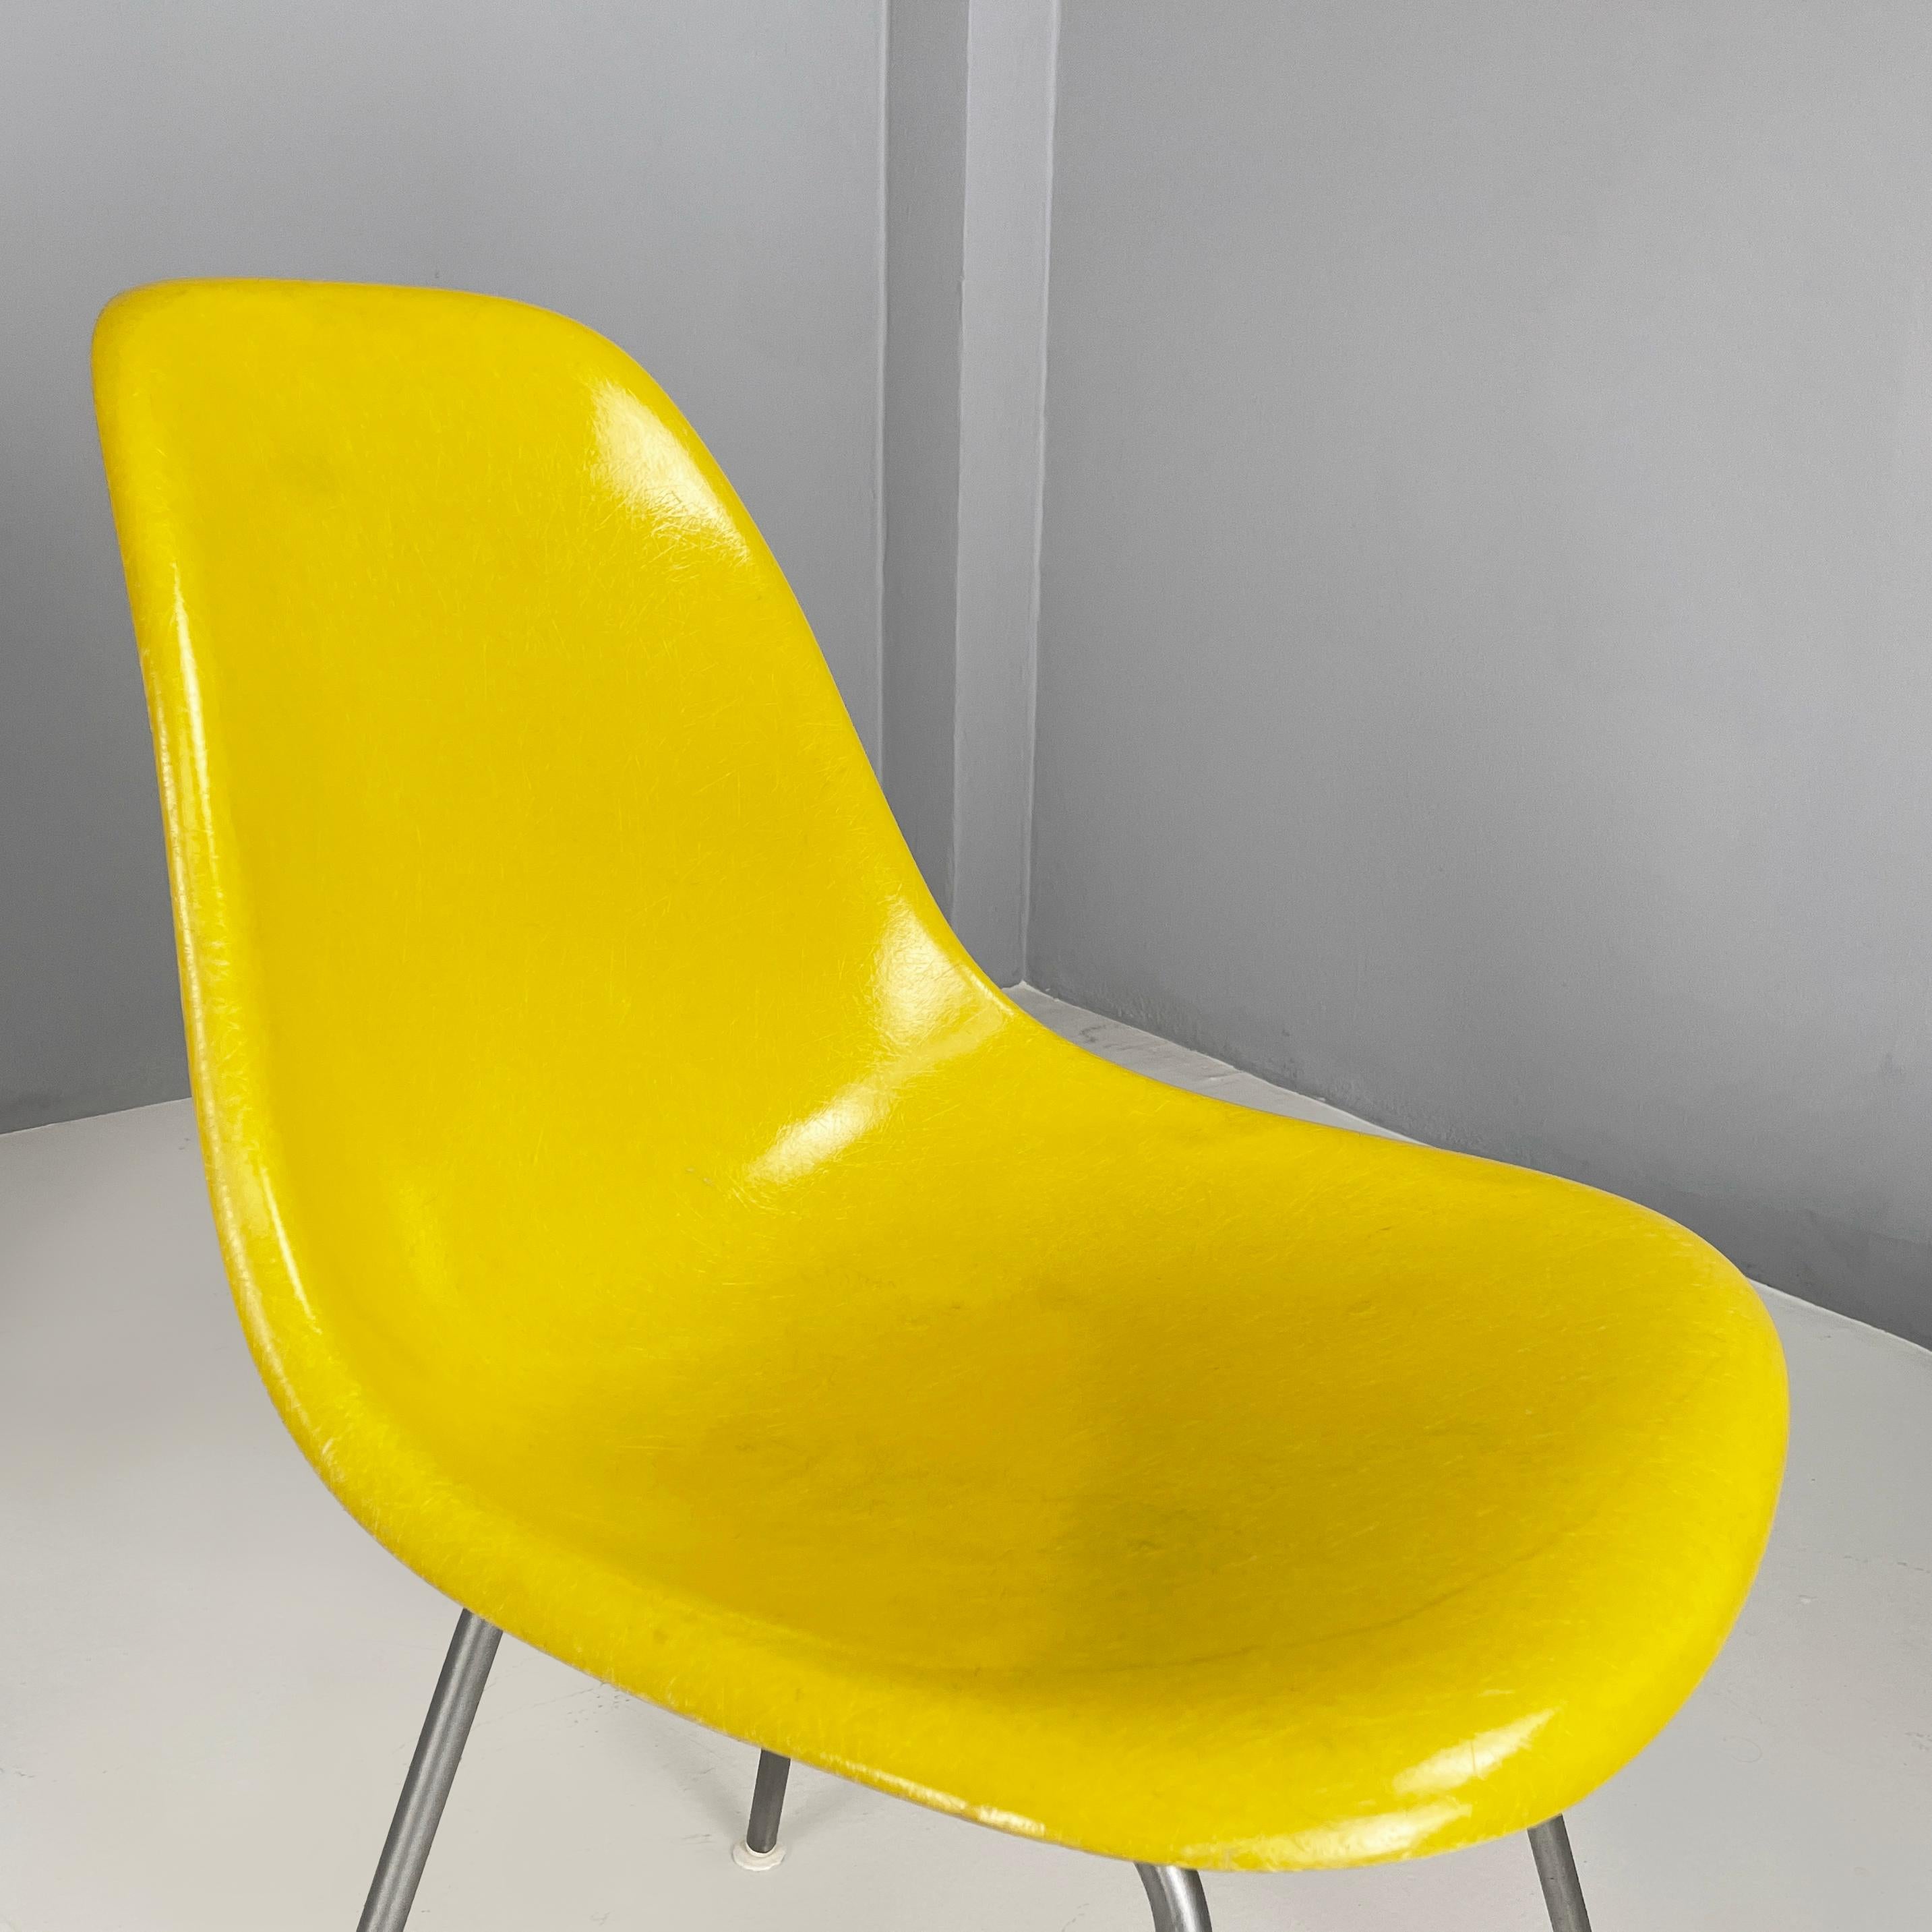 Late 20th Century American Yellow Shell Chairs by Charles and Ray Eames for Herman Miller, 1970s For Sale